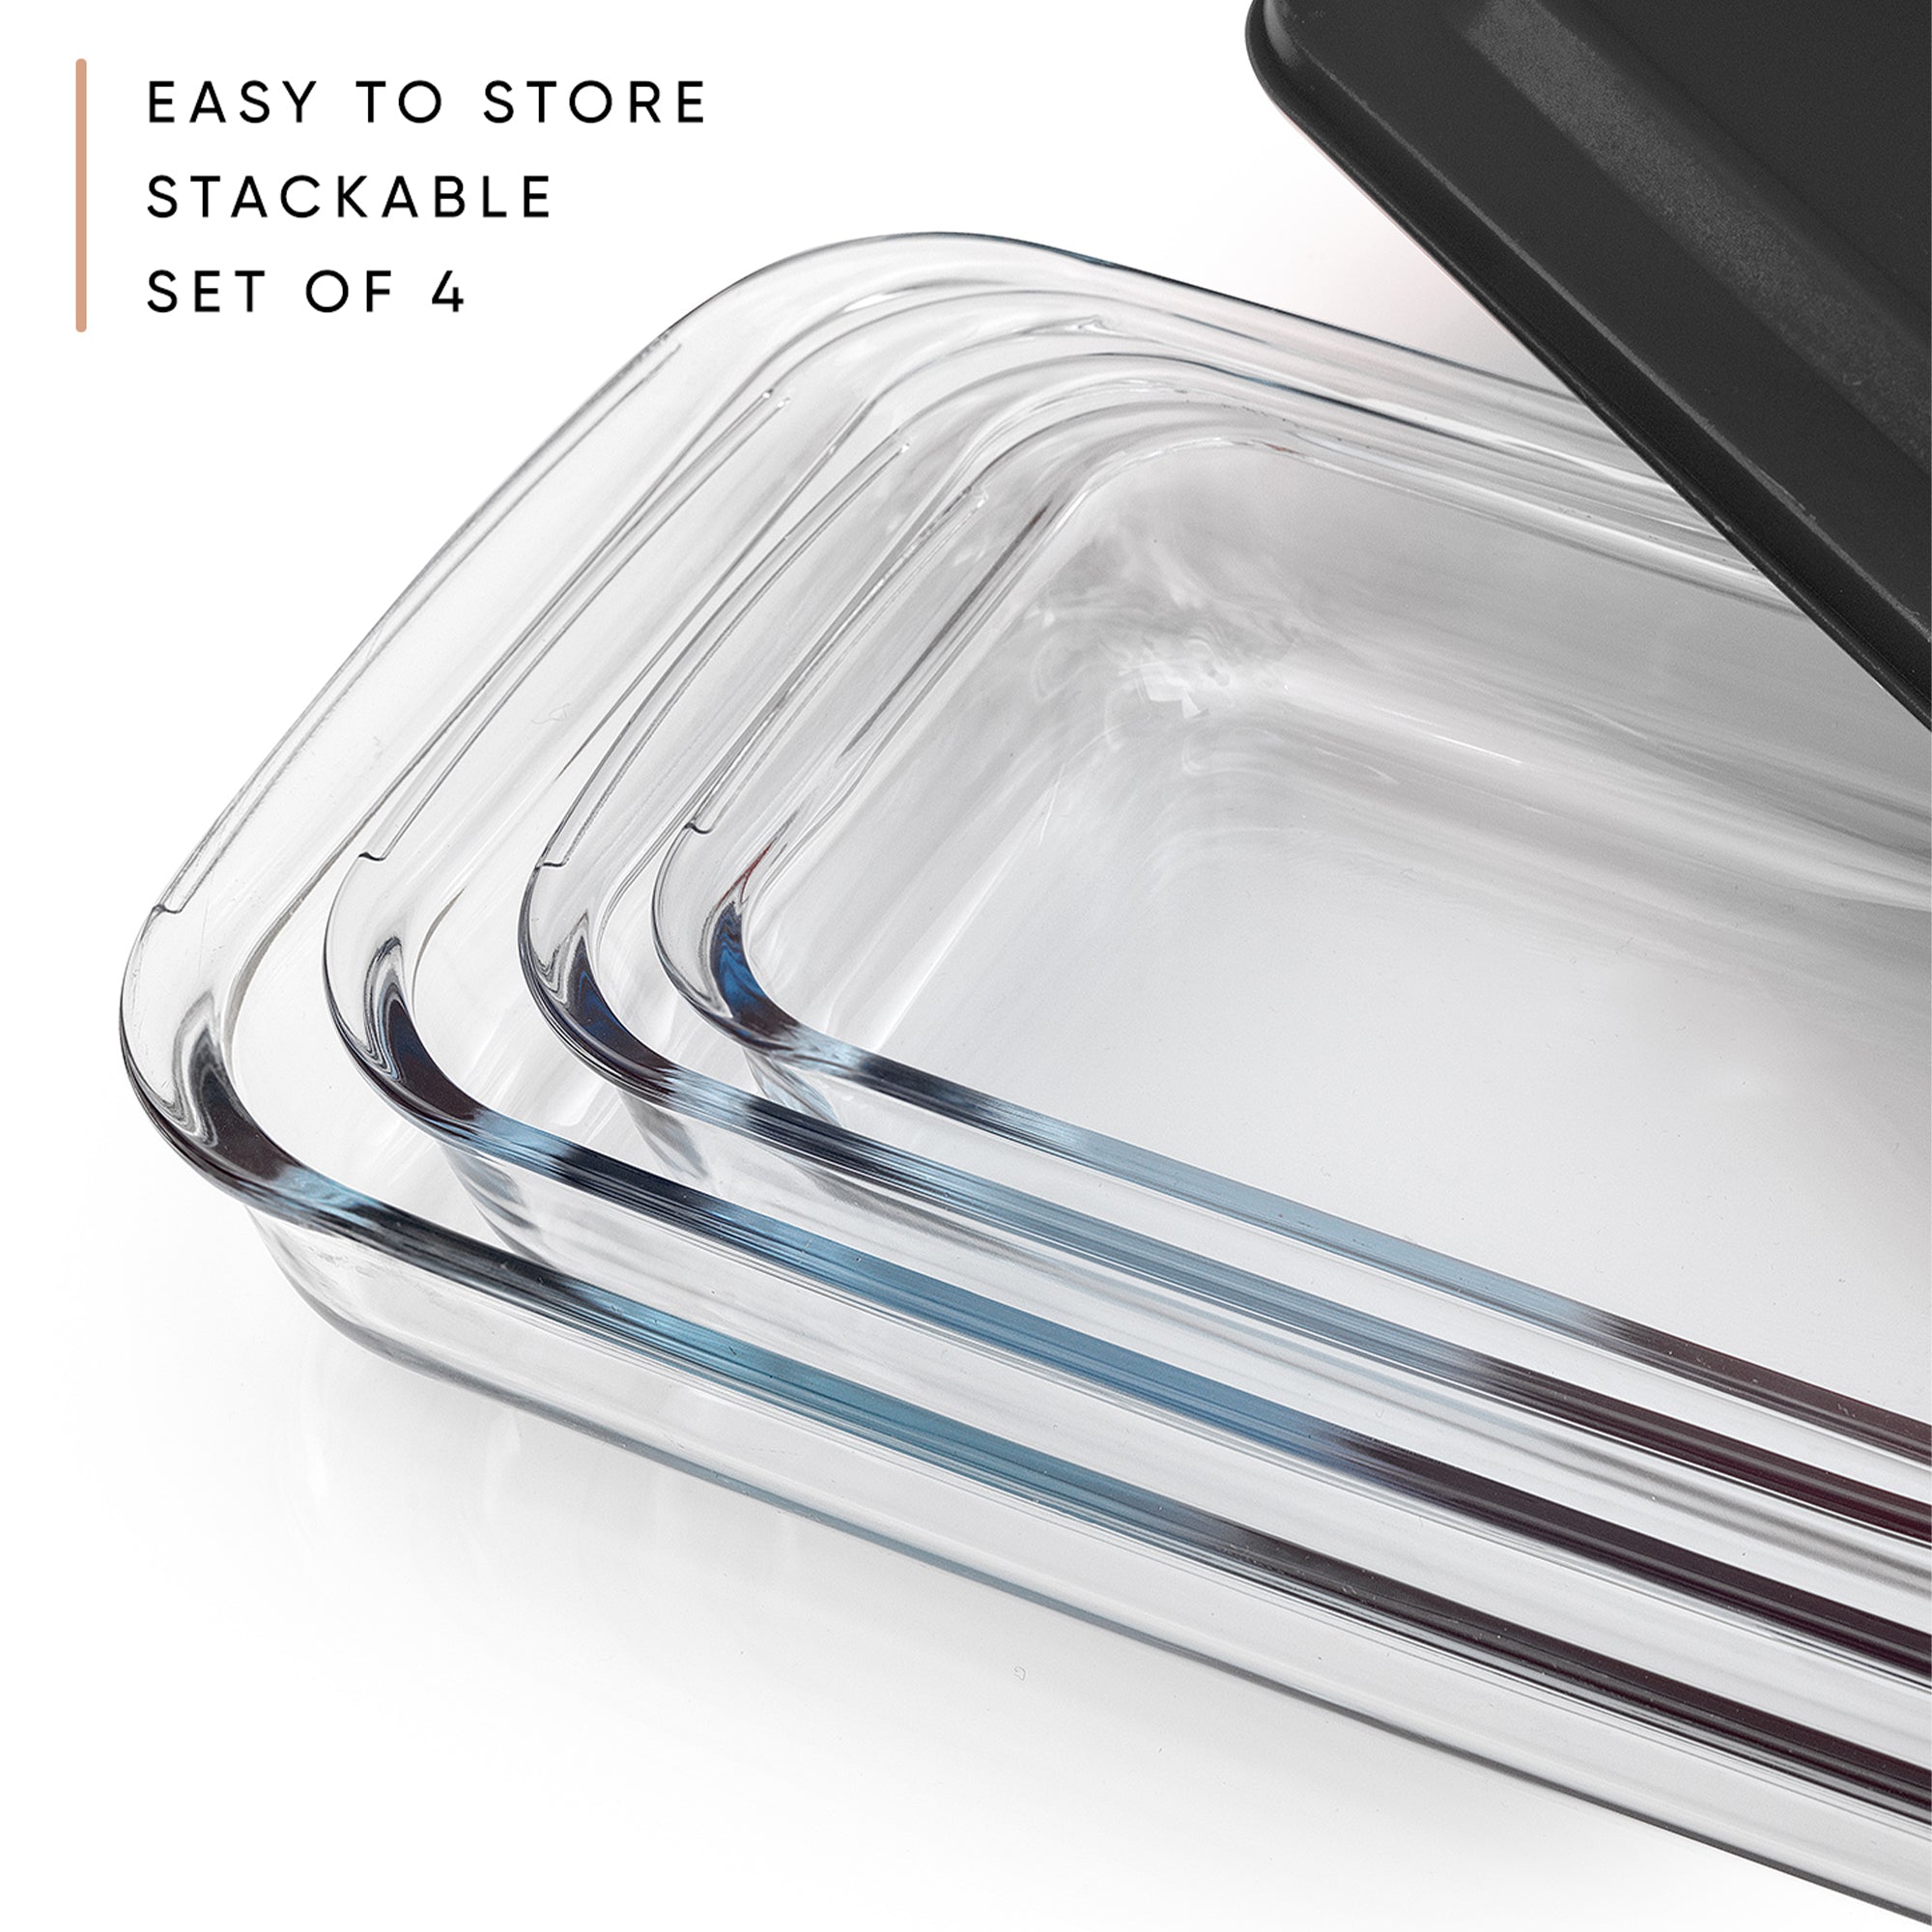 Borosilicate Glass Oven Dishes with Airtight Lids